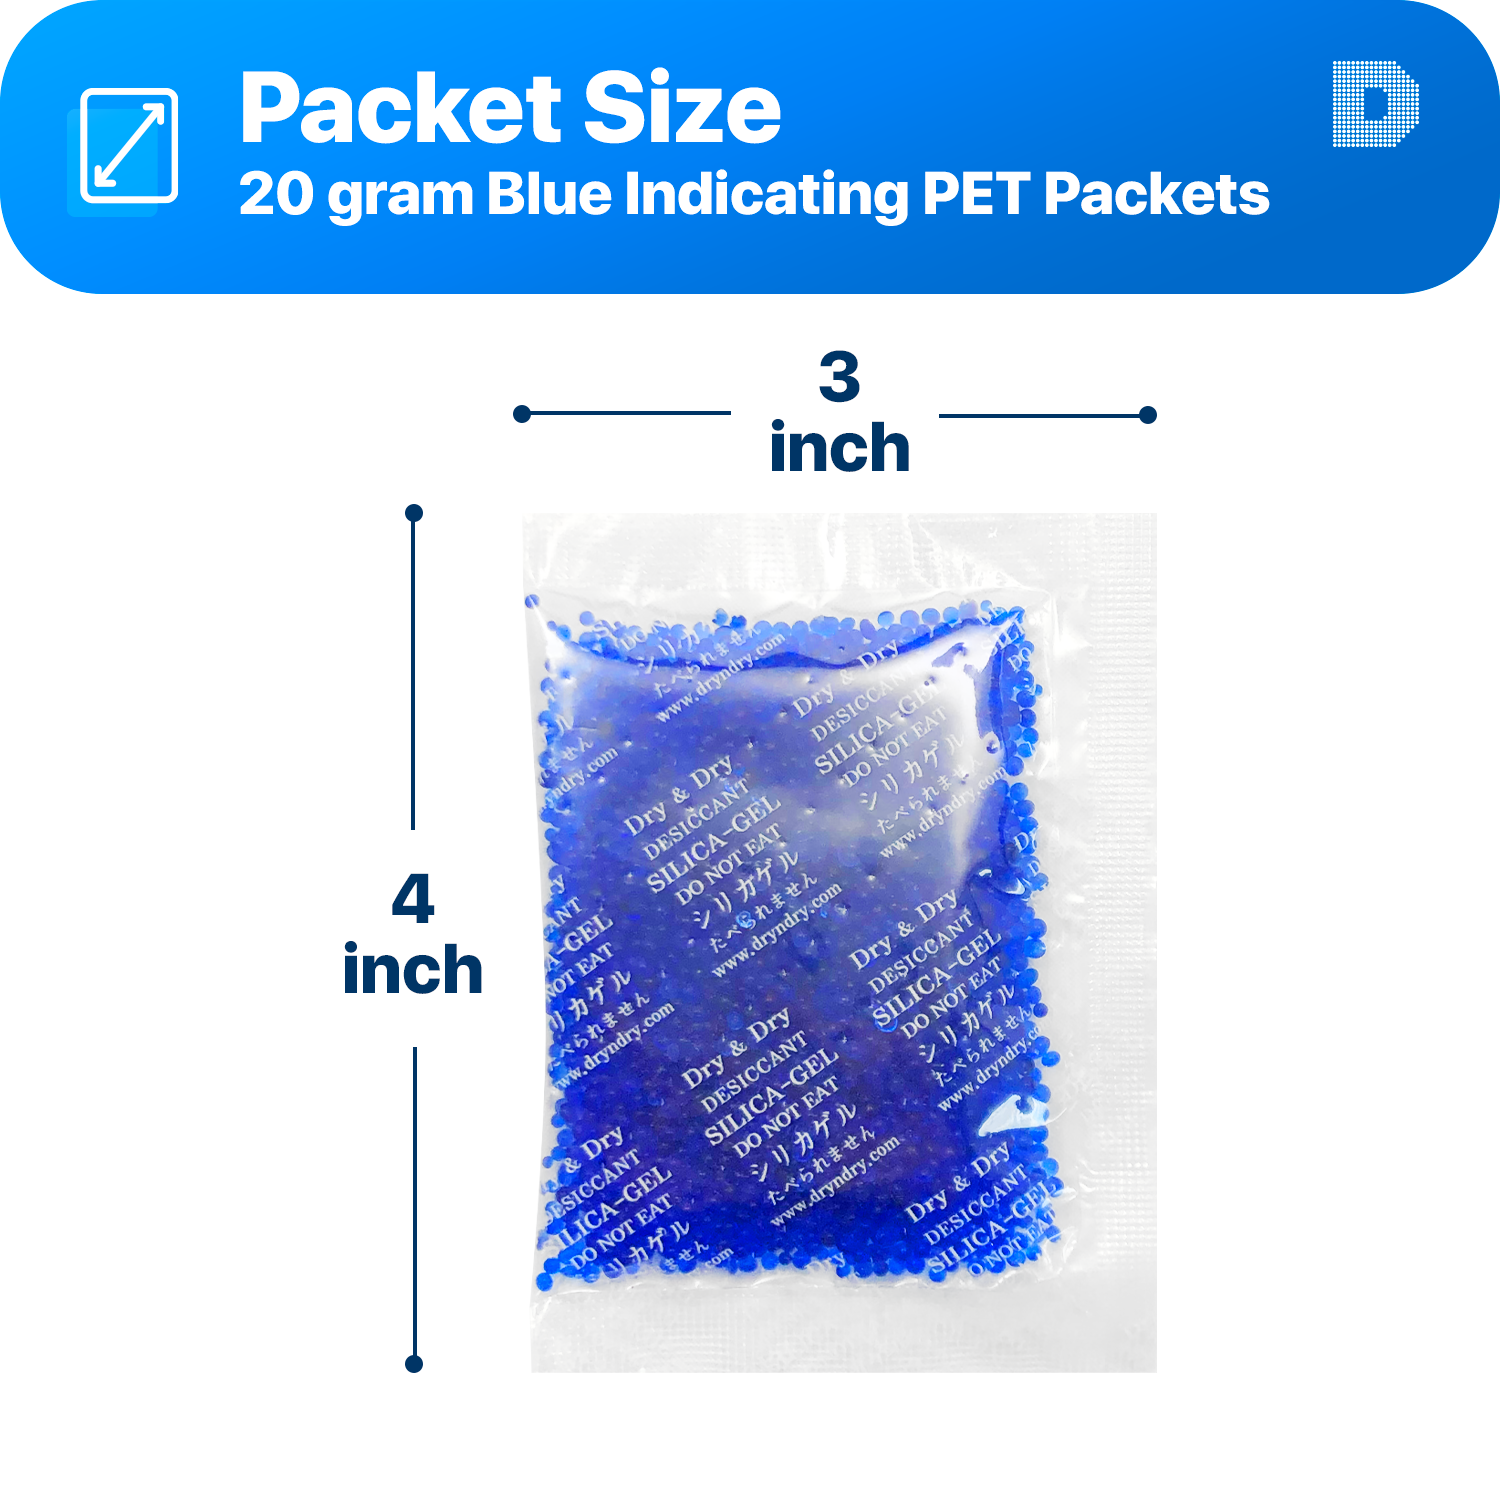 20 Gram Blue Indicating Clear Plastic(PET) Silica Gel Packets